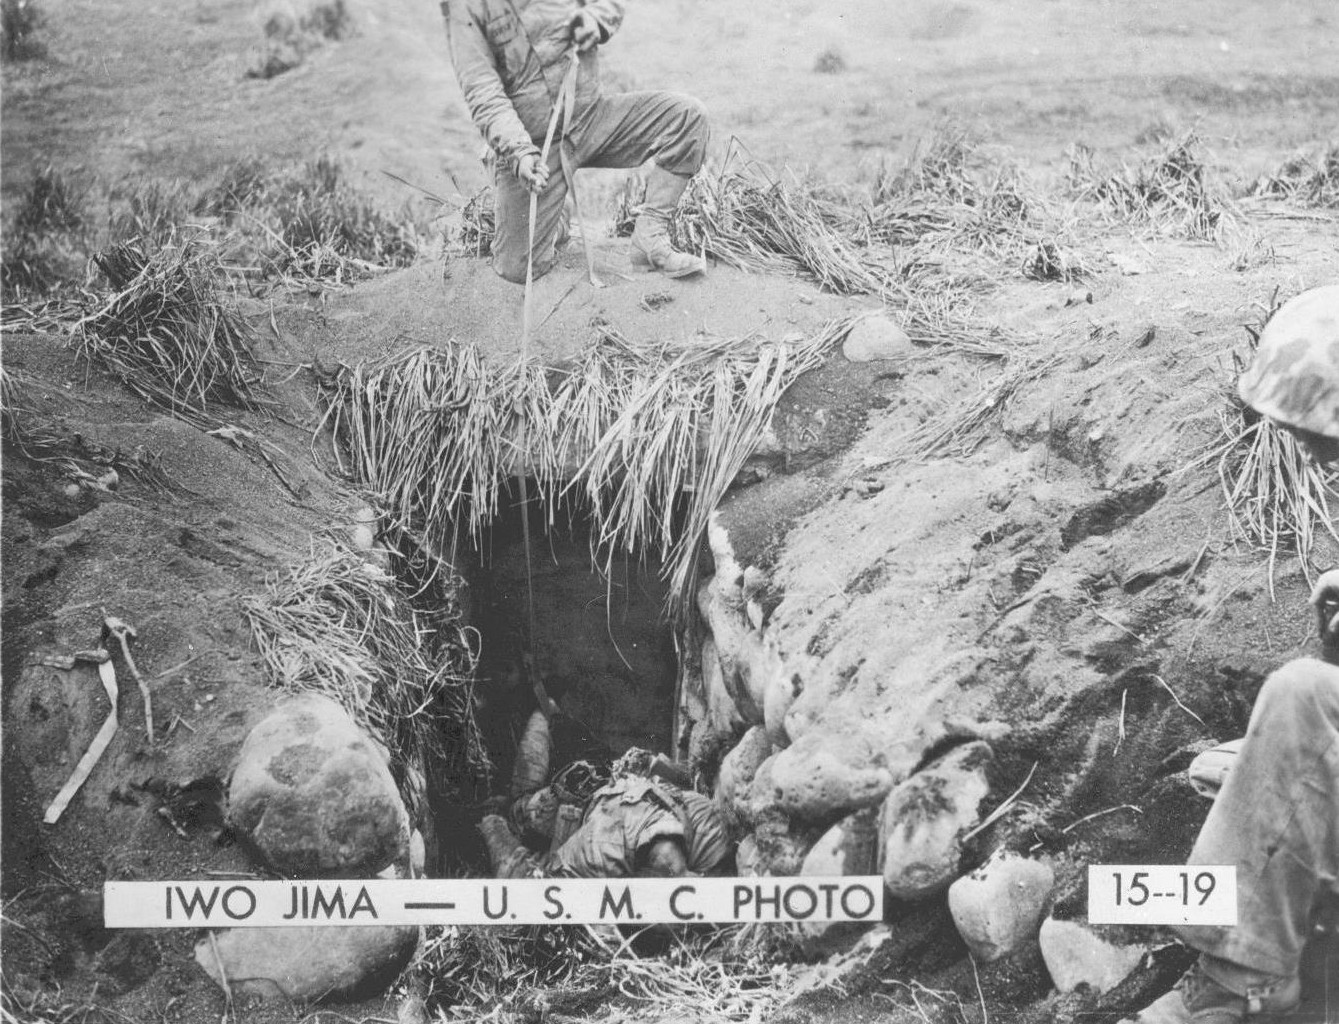 US Marines observing dead Japanese soldiers in a cave on Iwo Jima, Feb 1945